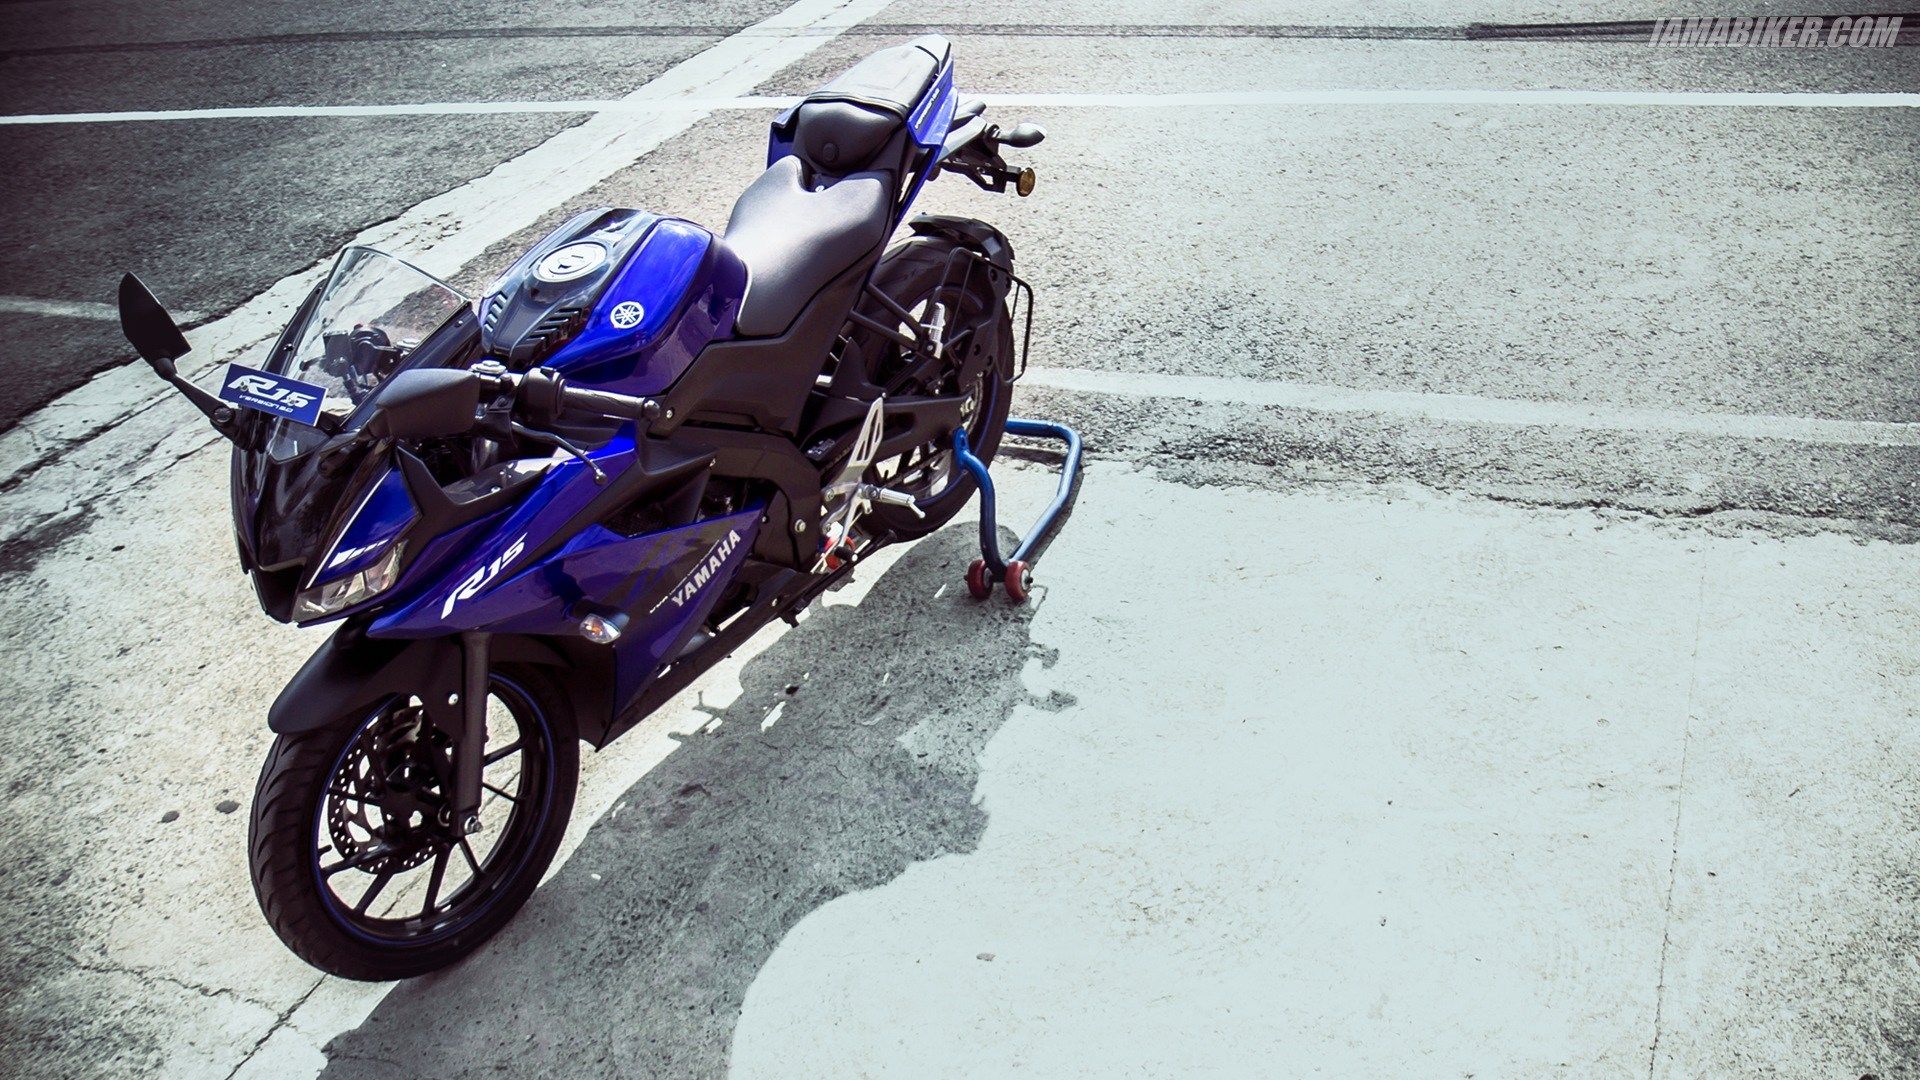 BS6 Compliant Yamaha Bikes Could Be Launched In Nov. IAMABIKER